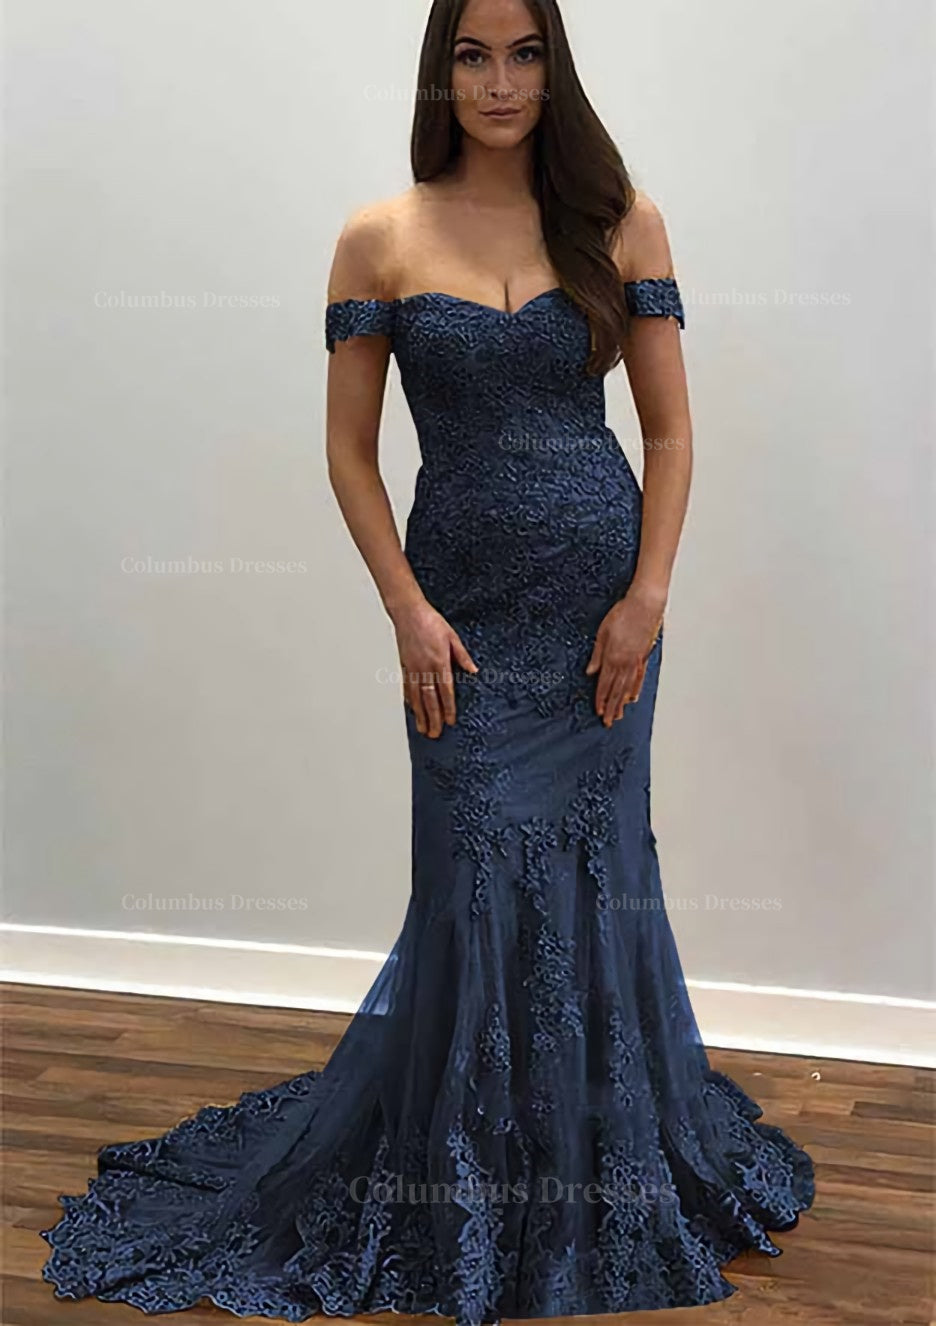 Bridesmaid Dresses Blue, Trumpet/Mermaid Off-the-Shoulder Court Train Tulle Prom Dress With Lace Appliqued